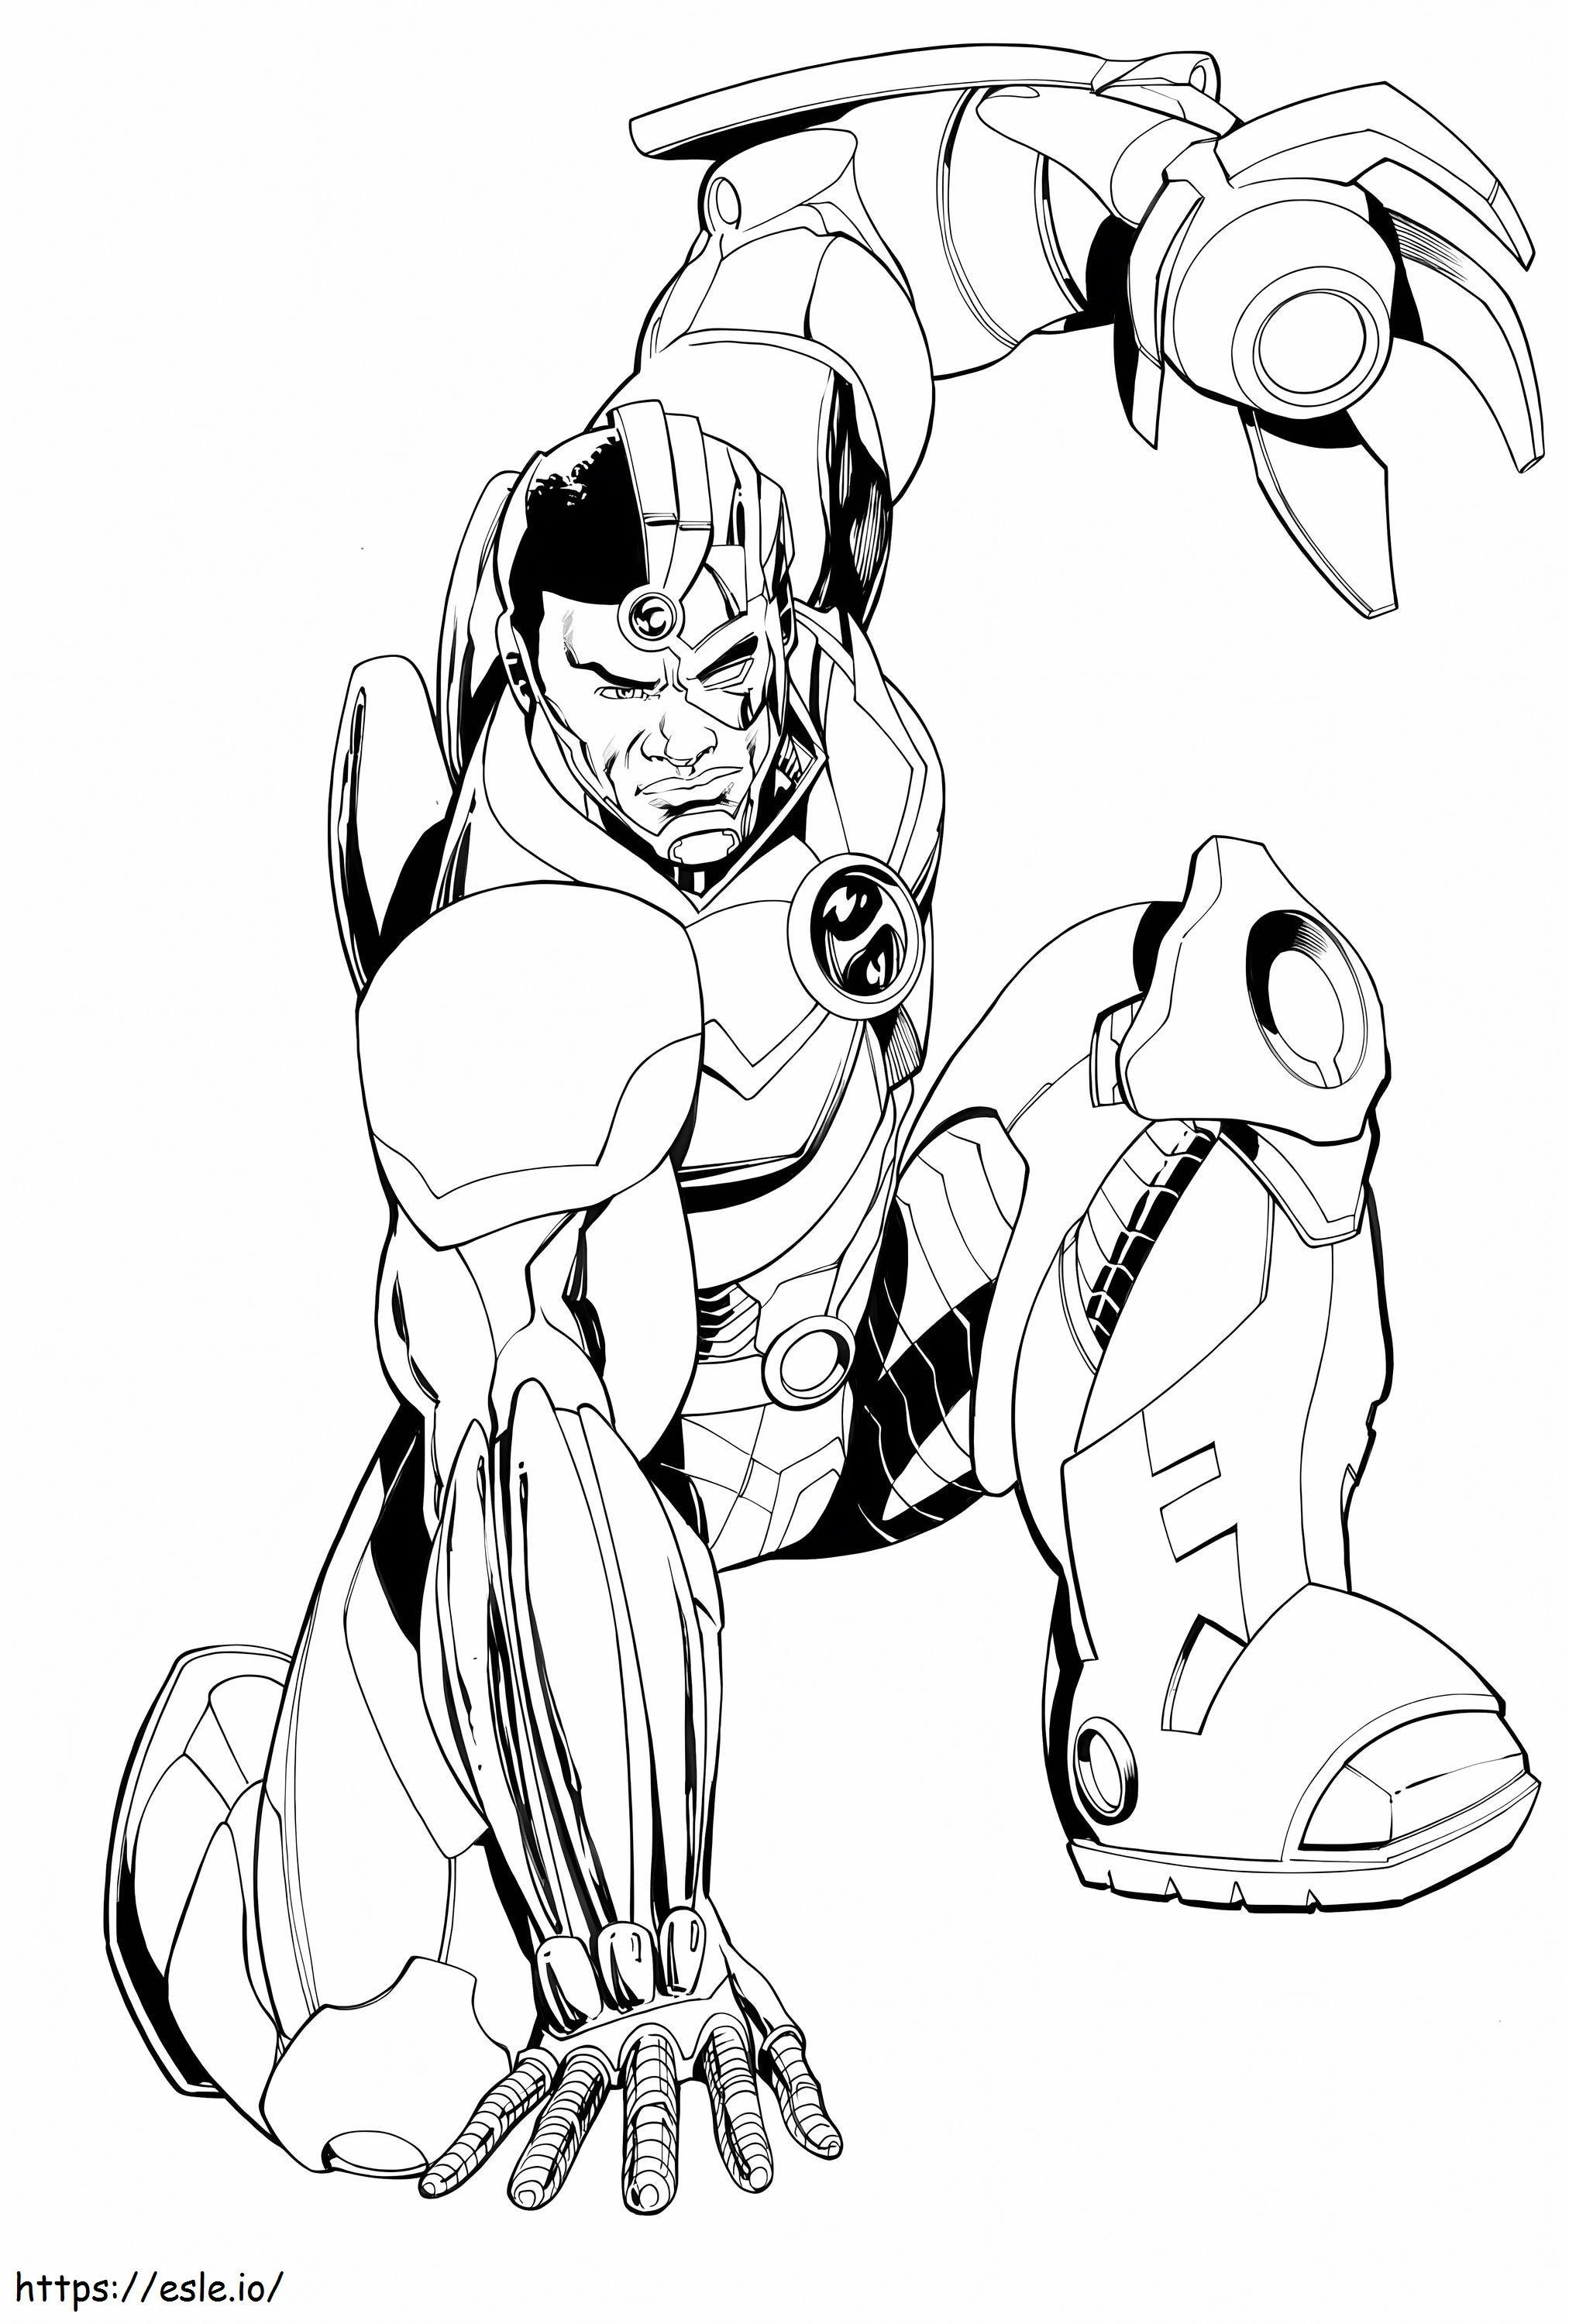 Nice Cyborg coloring page